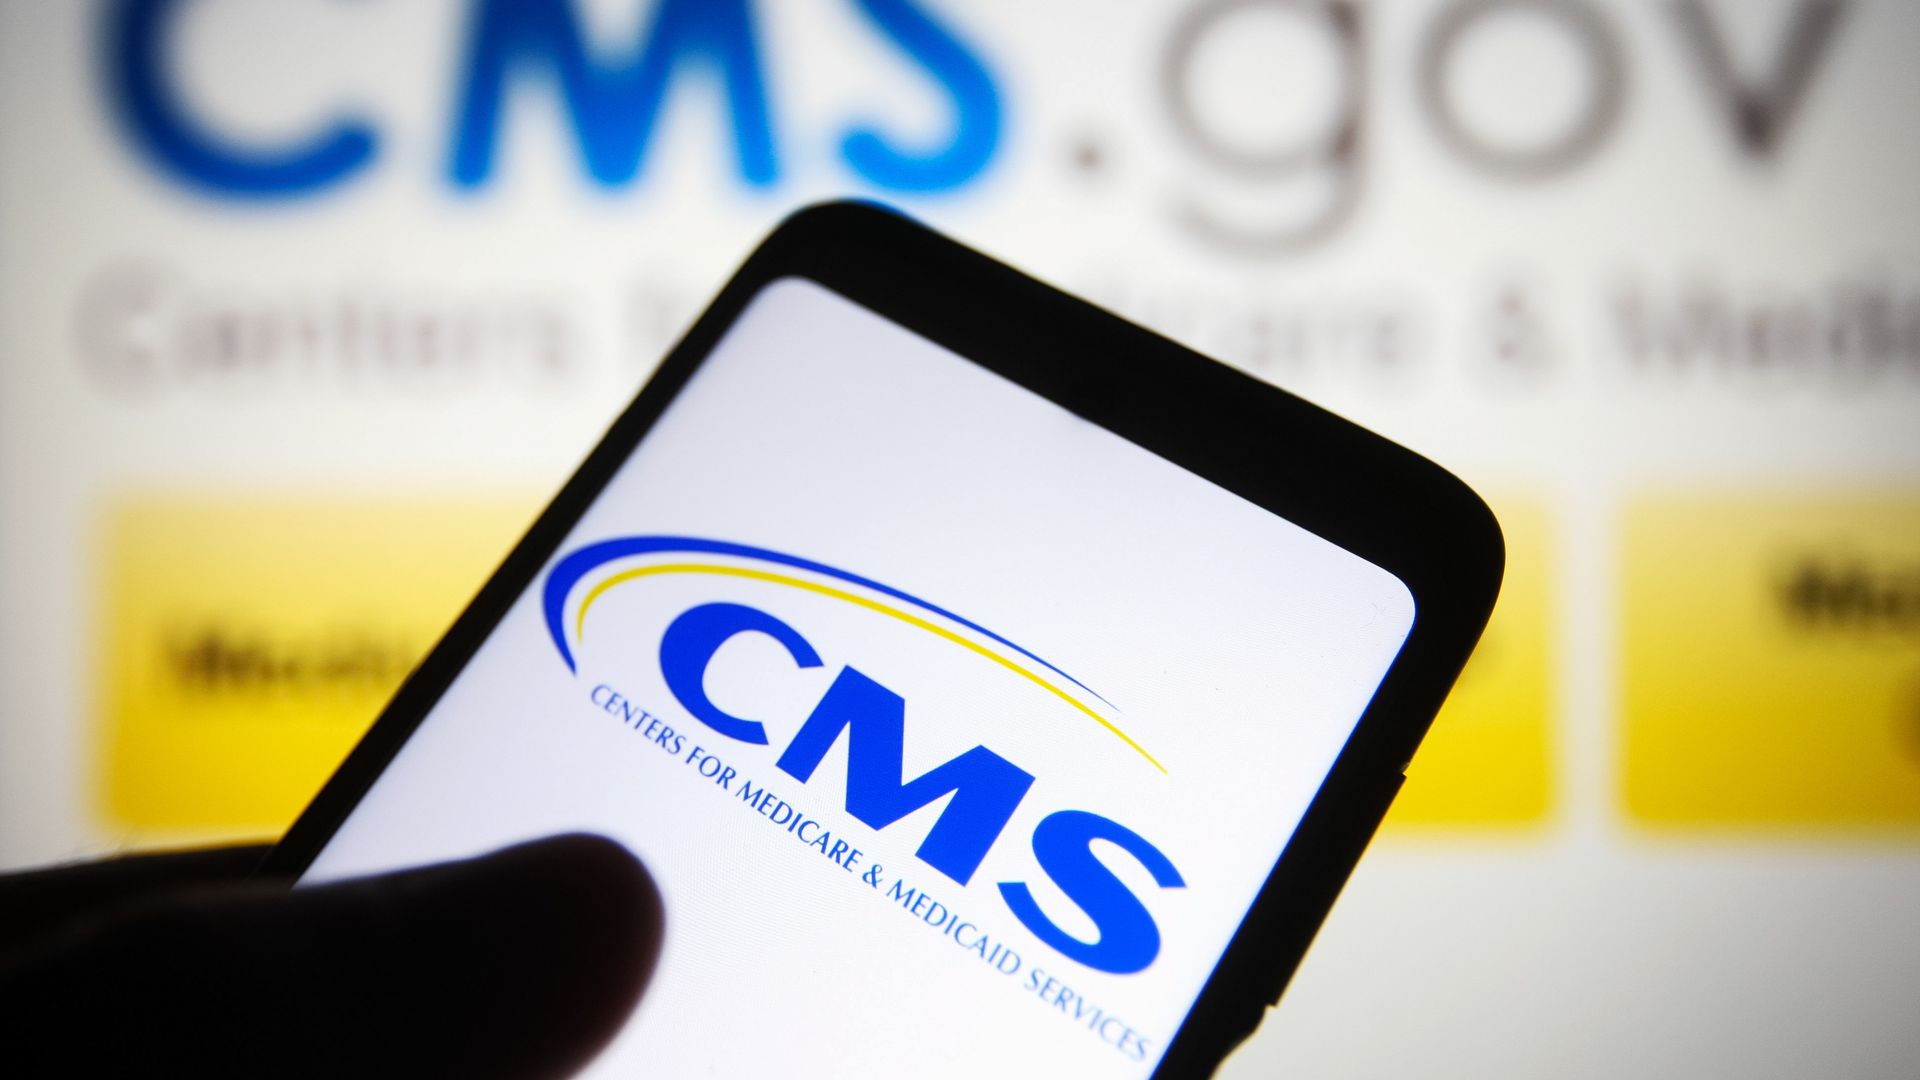 The CMS logo on a phone screen.